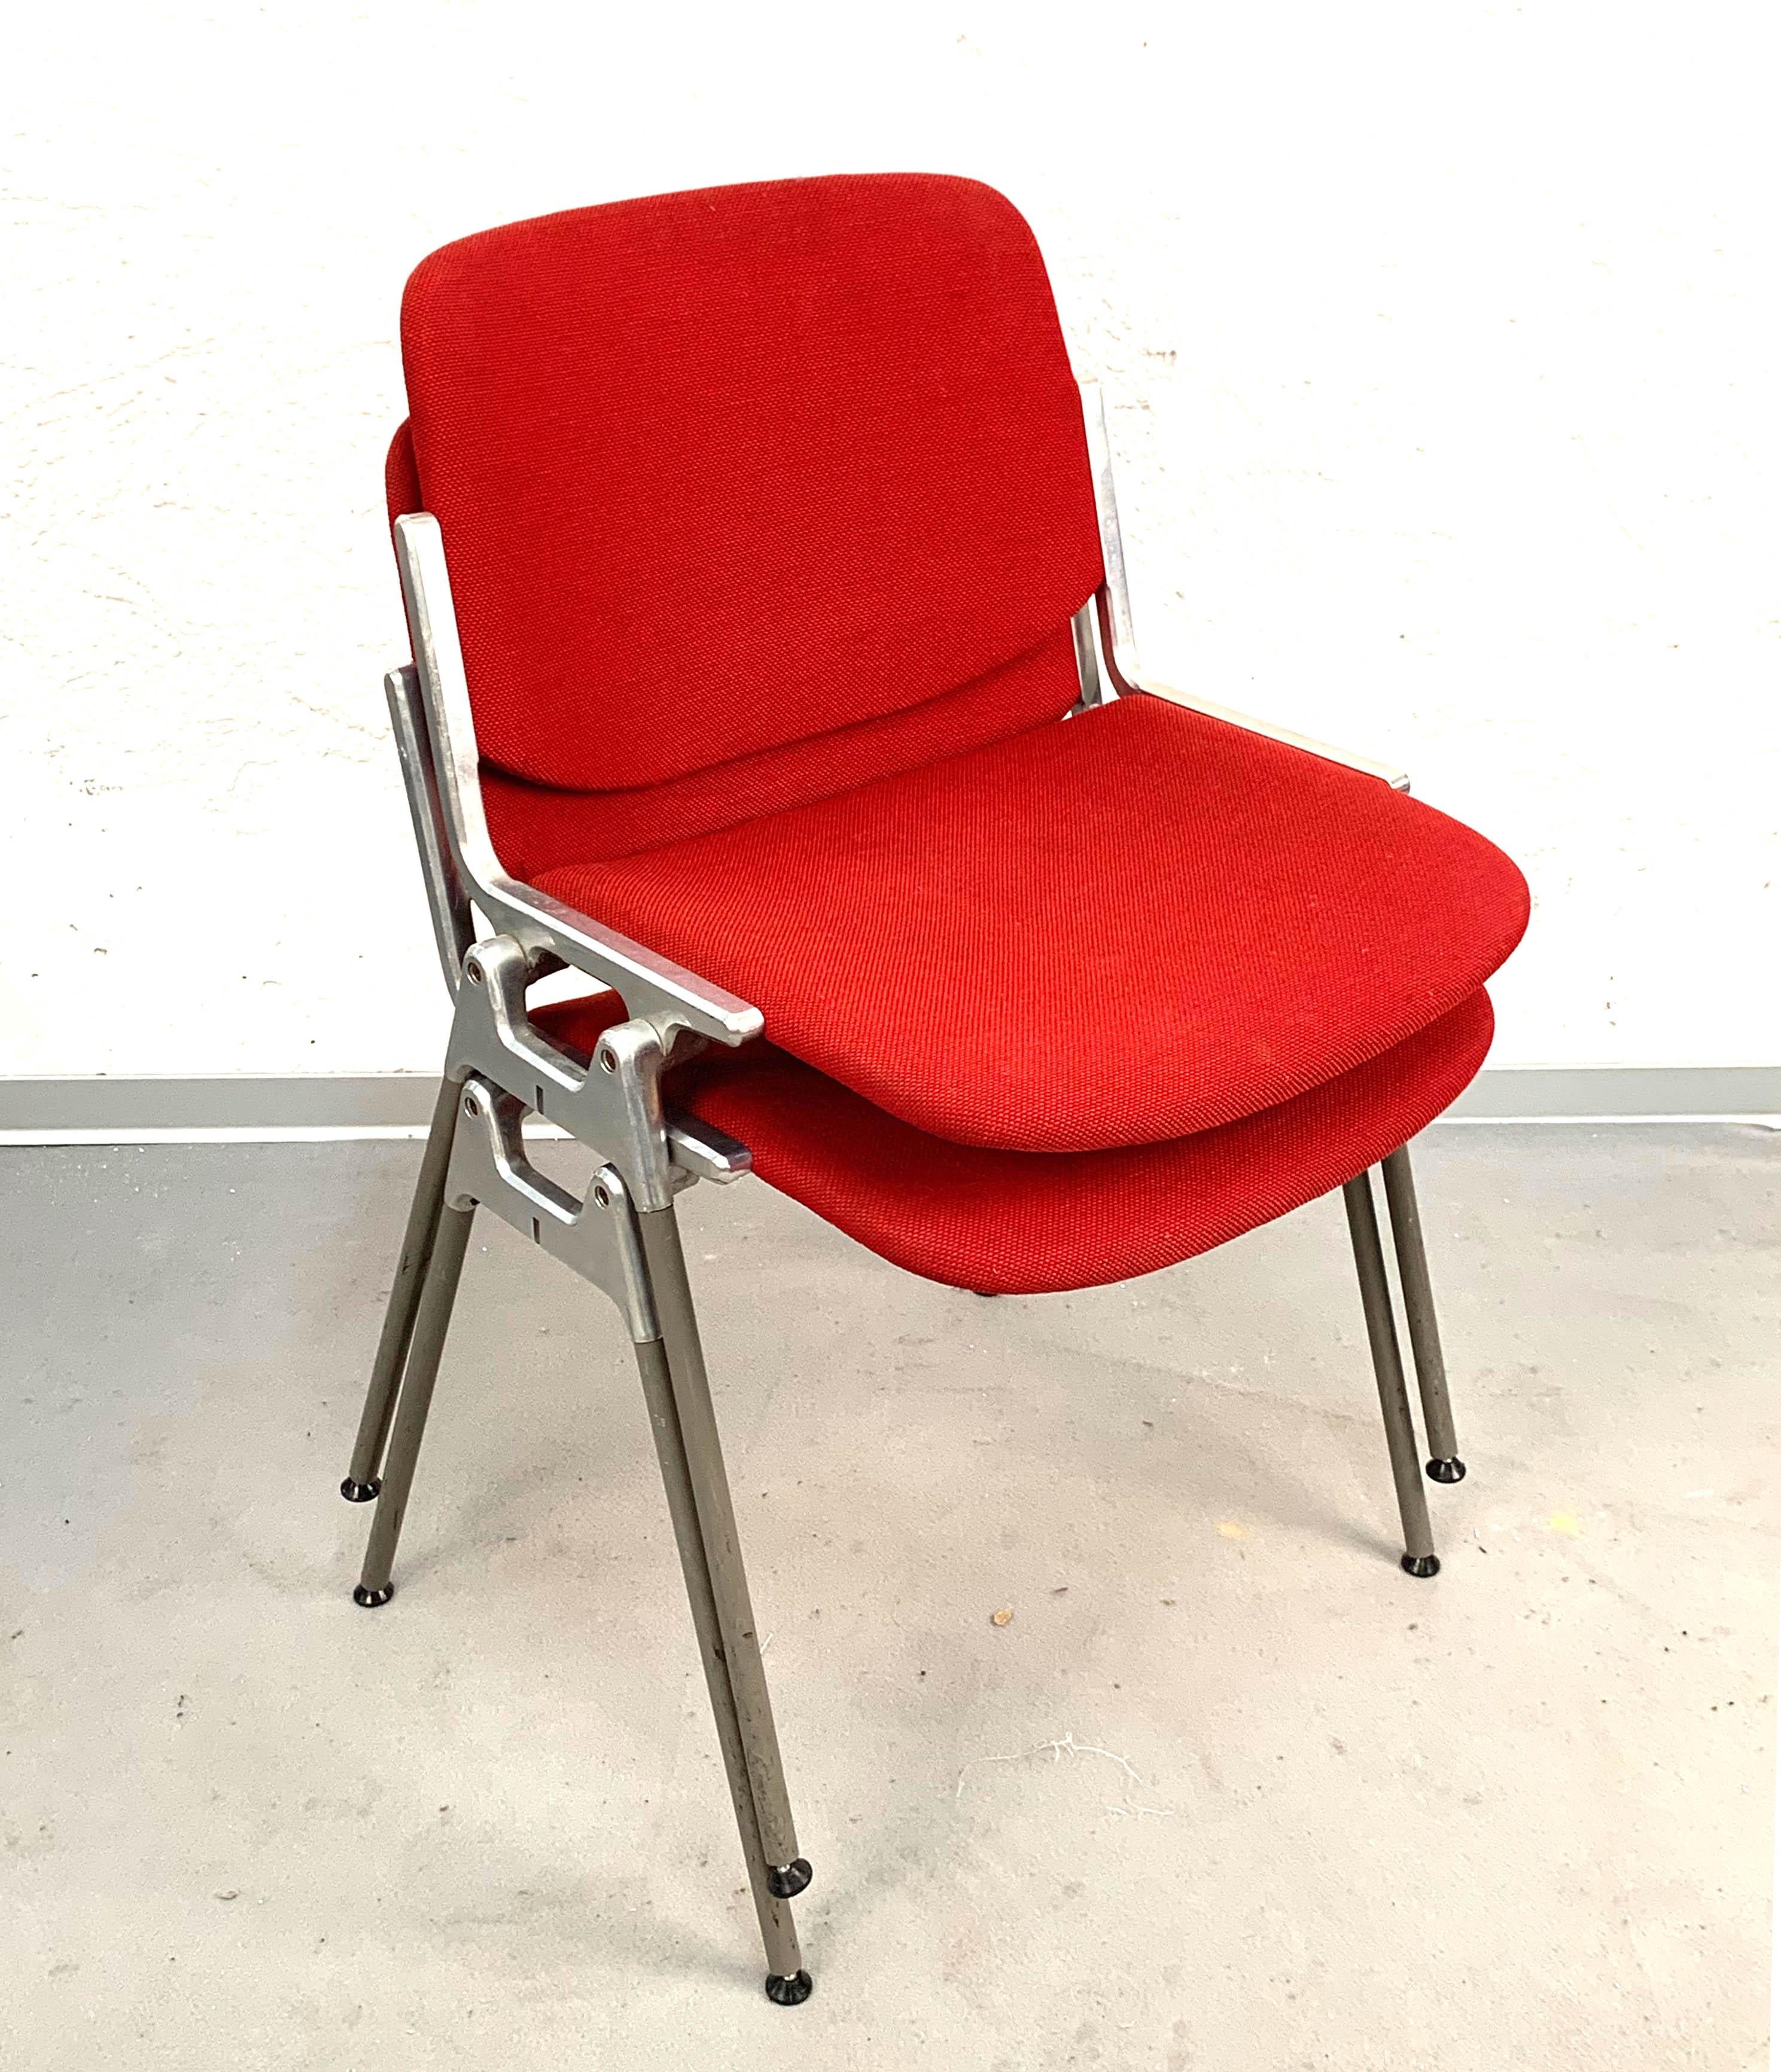 castelli chairs for sale